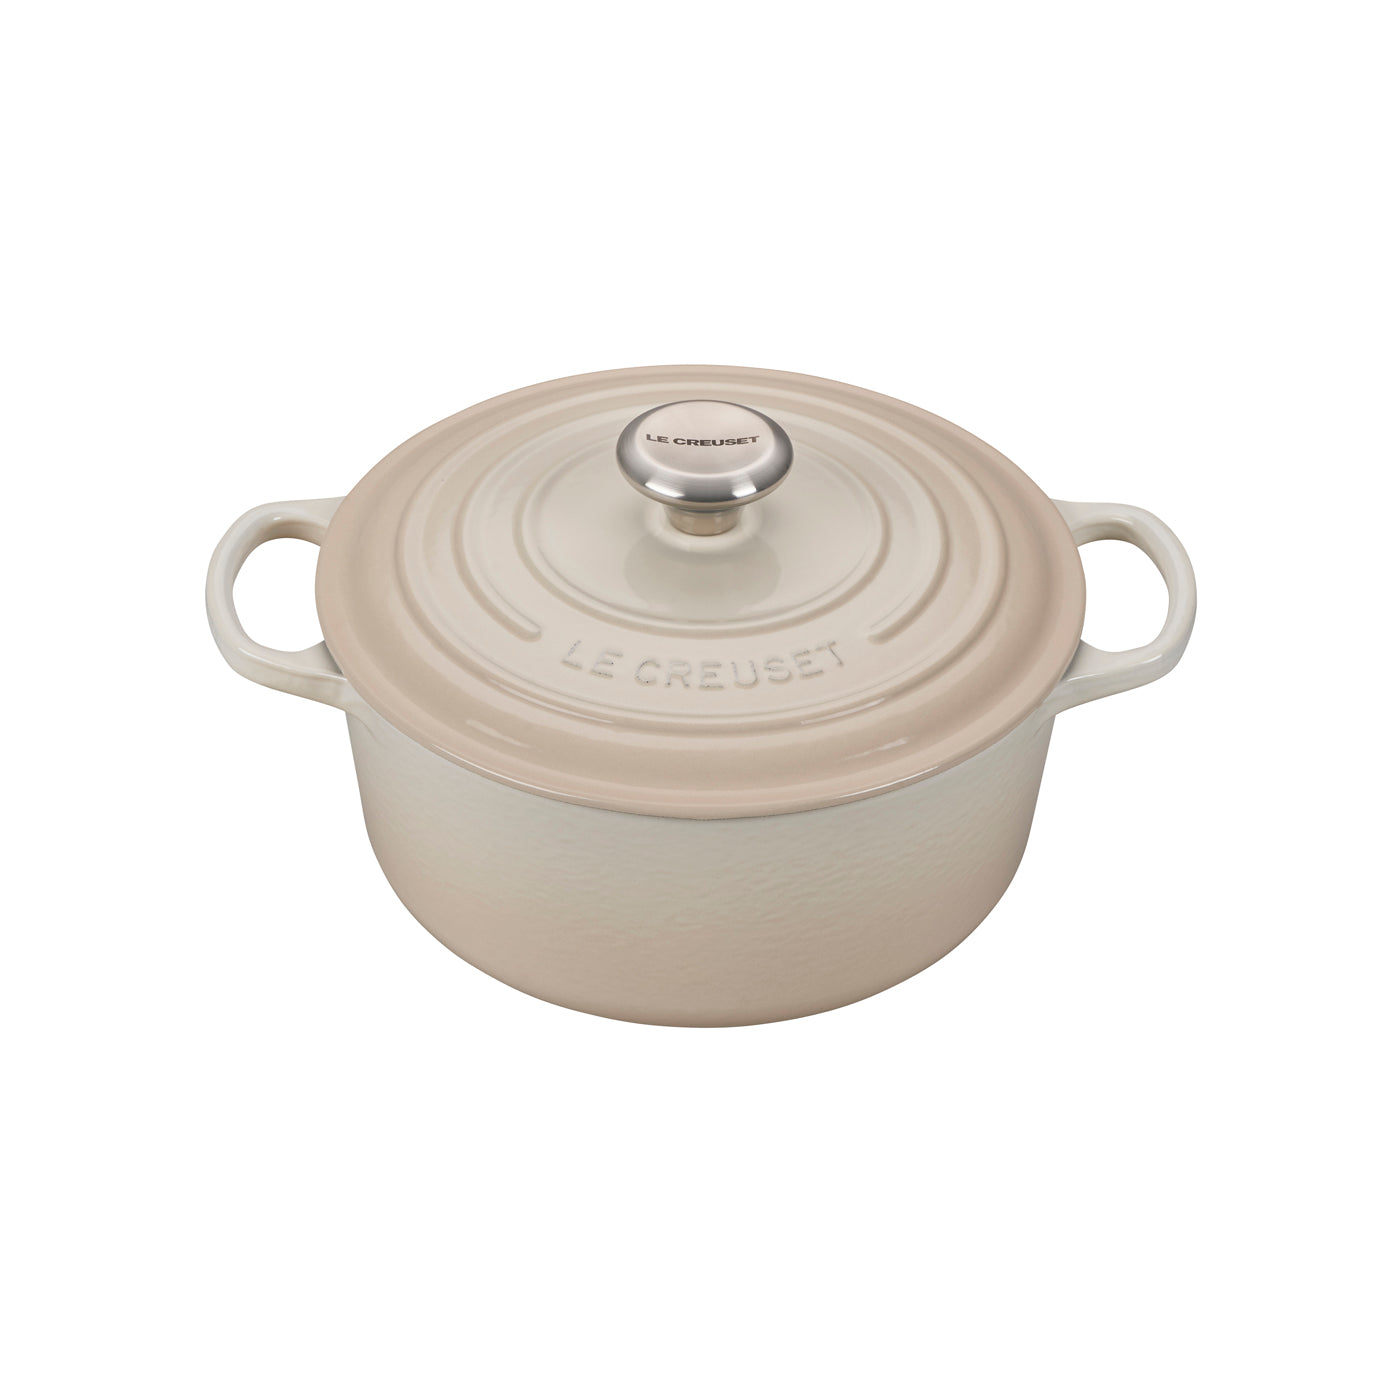 Le Creuset 4 1/2 Qt. Signature Round Dutch Oven w/Stainless Steel Knob –  Chef's Arsenal